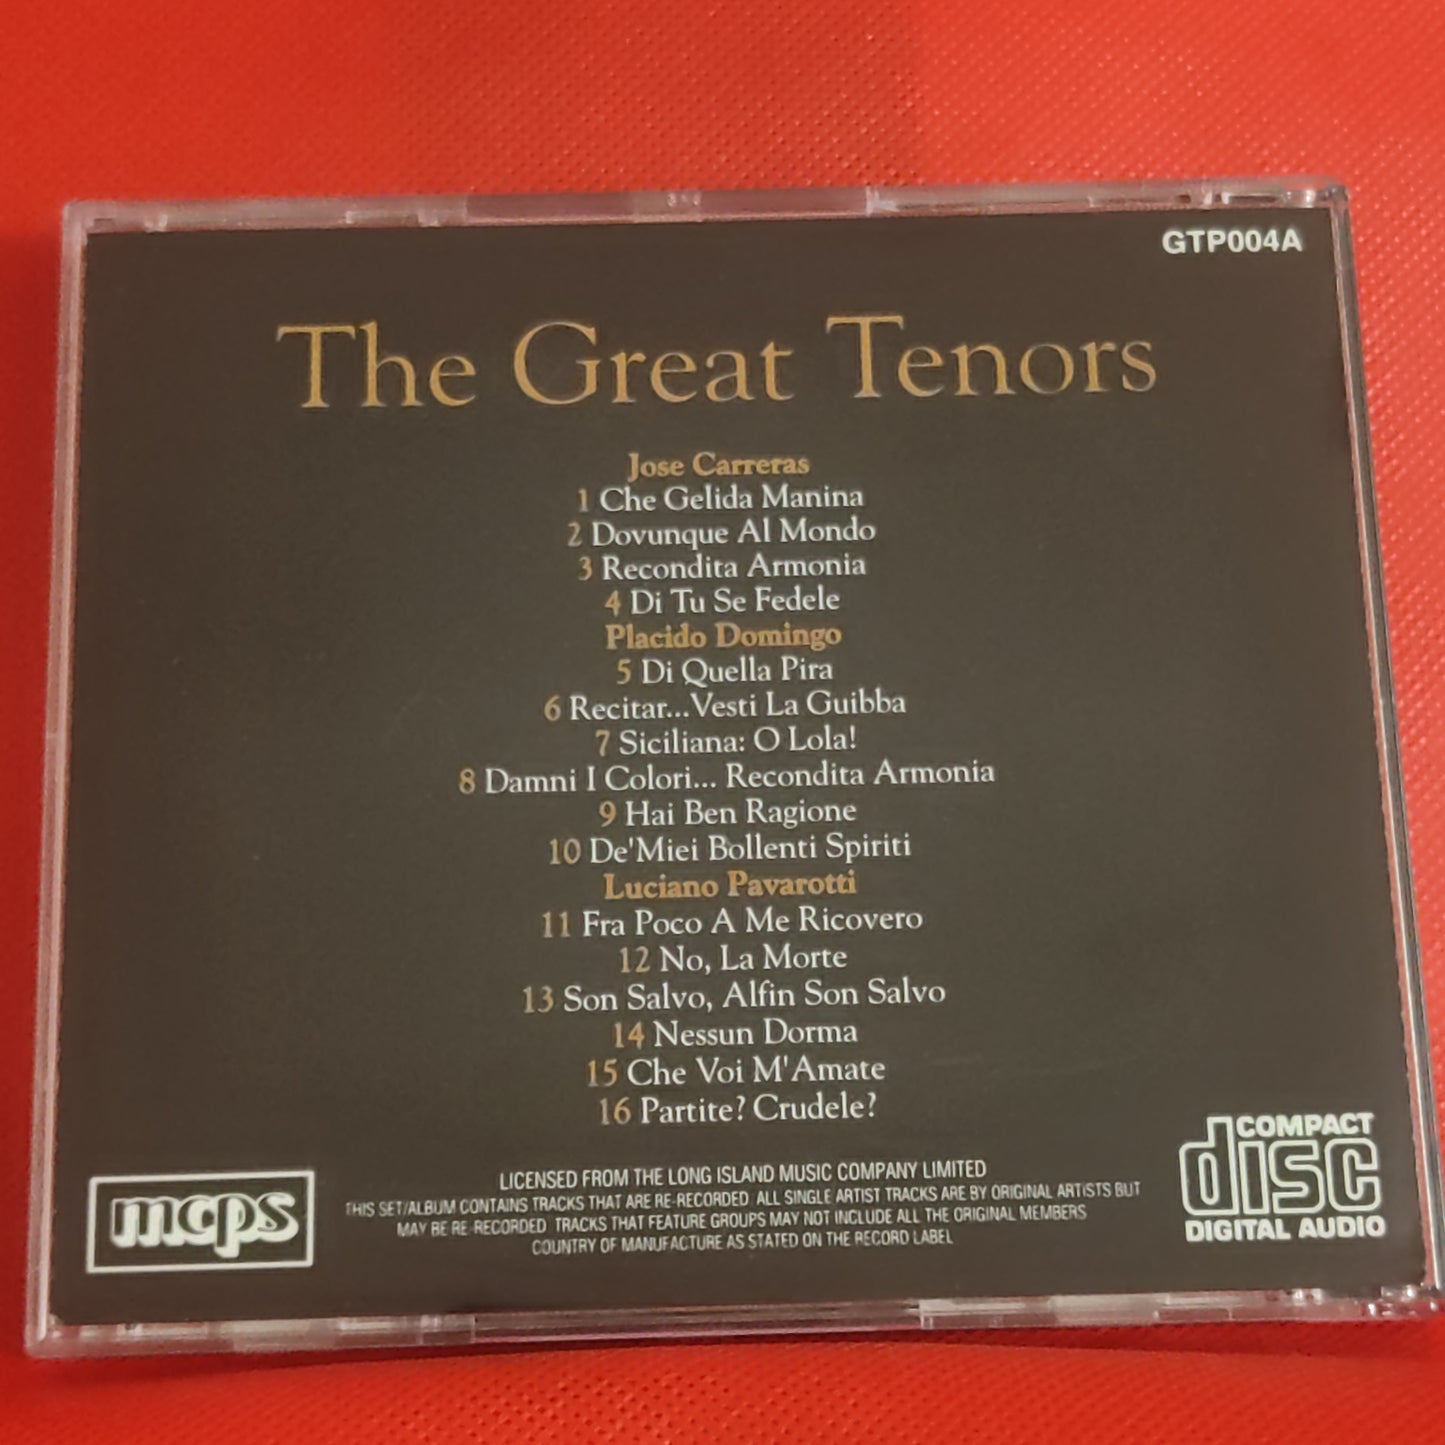 The Great Tenors Vol 1, 2 and 3